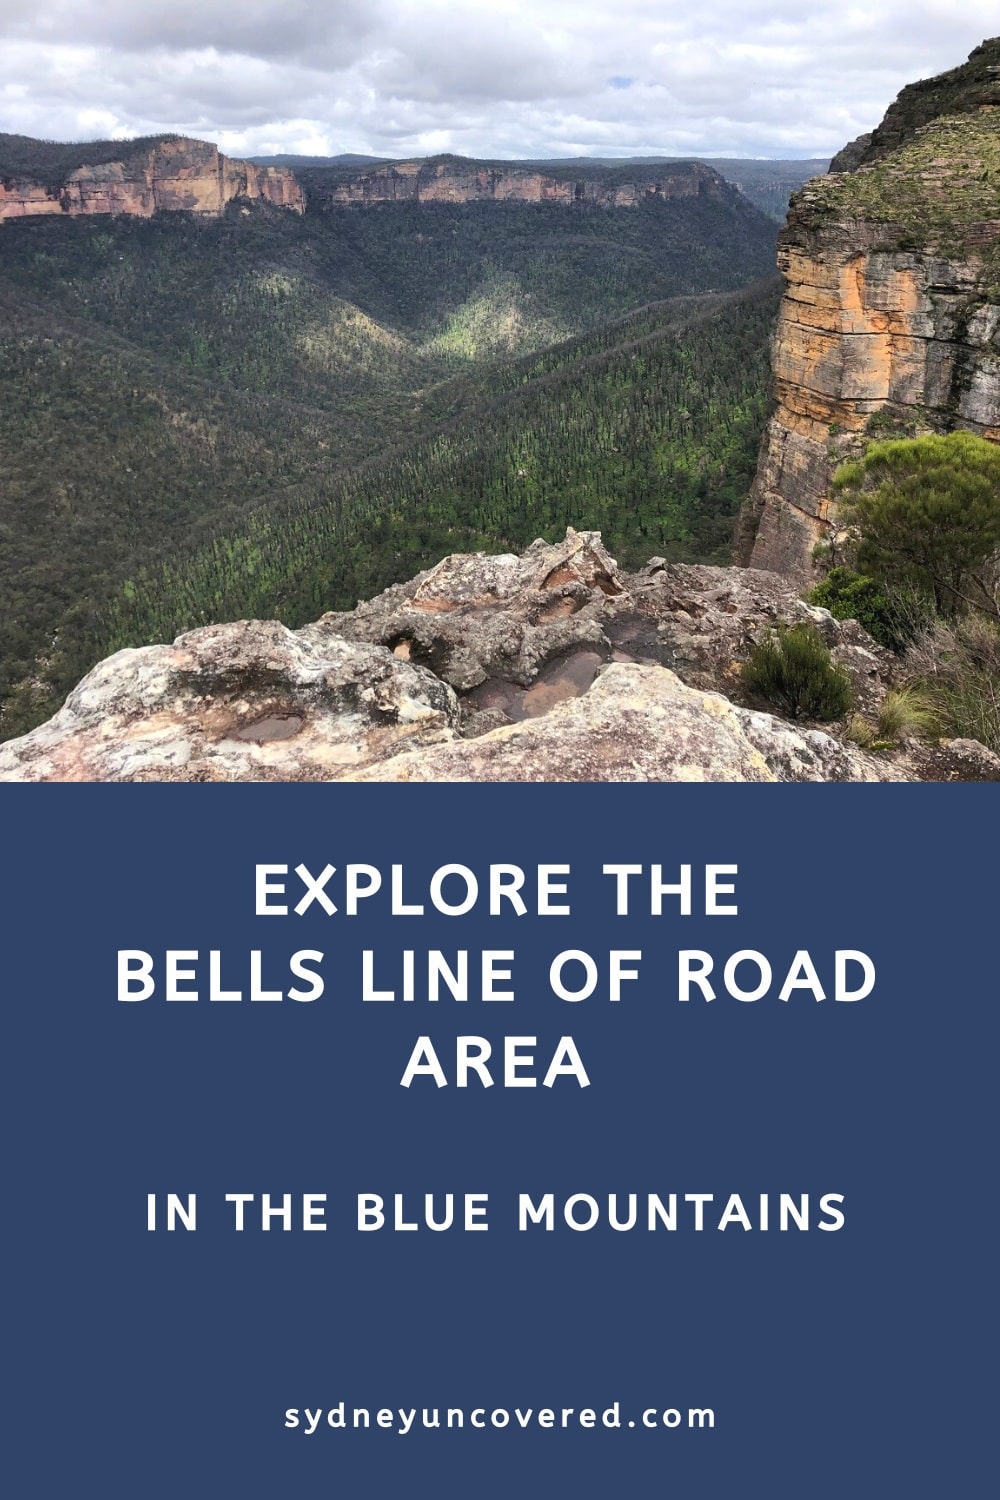 Explore the Bells Line of Road area in the Blue Mountains